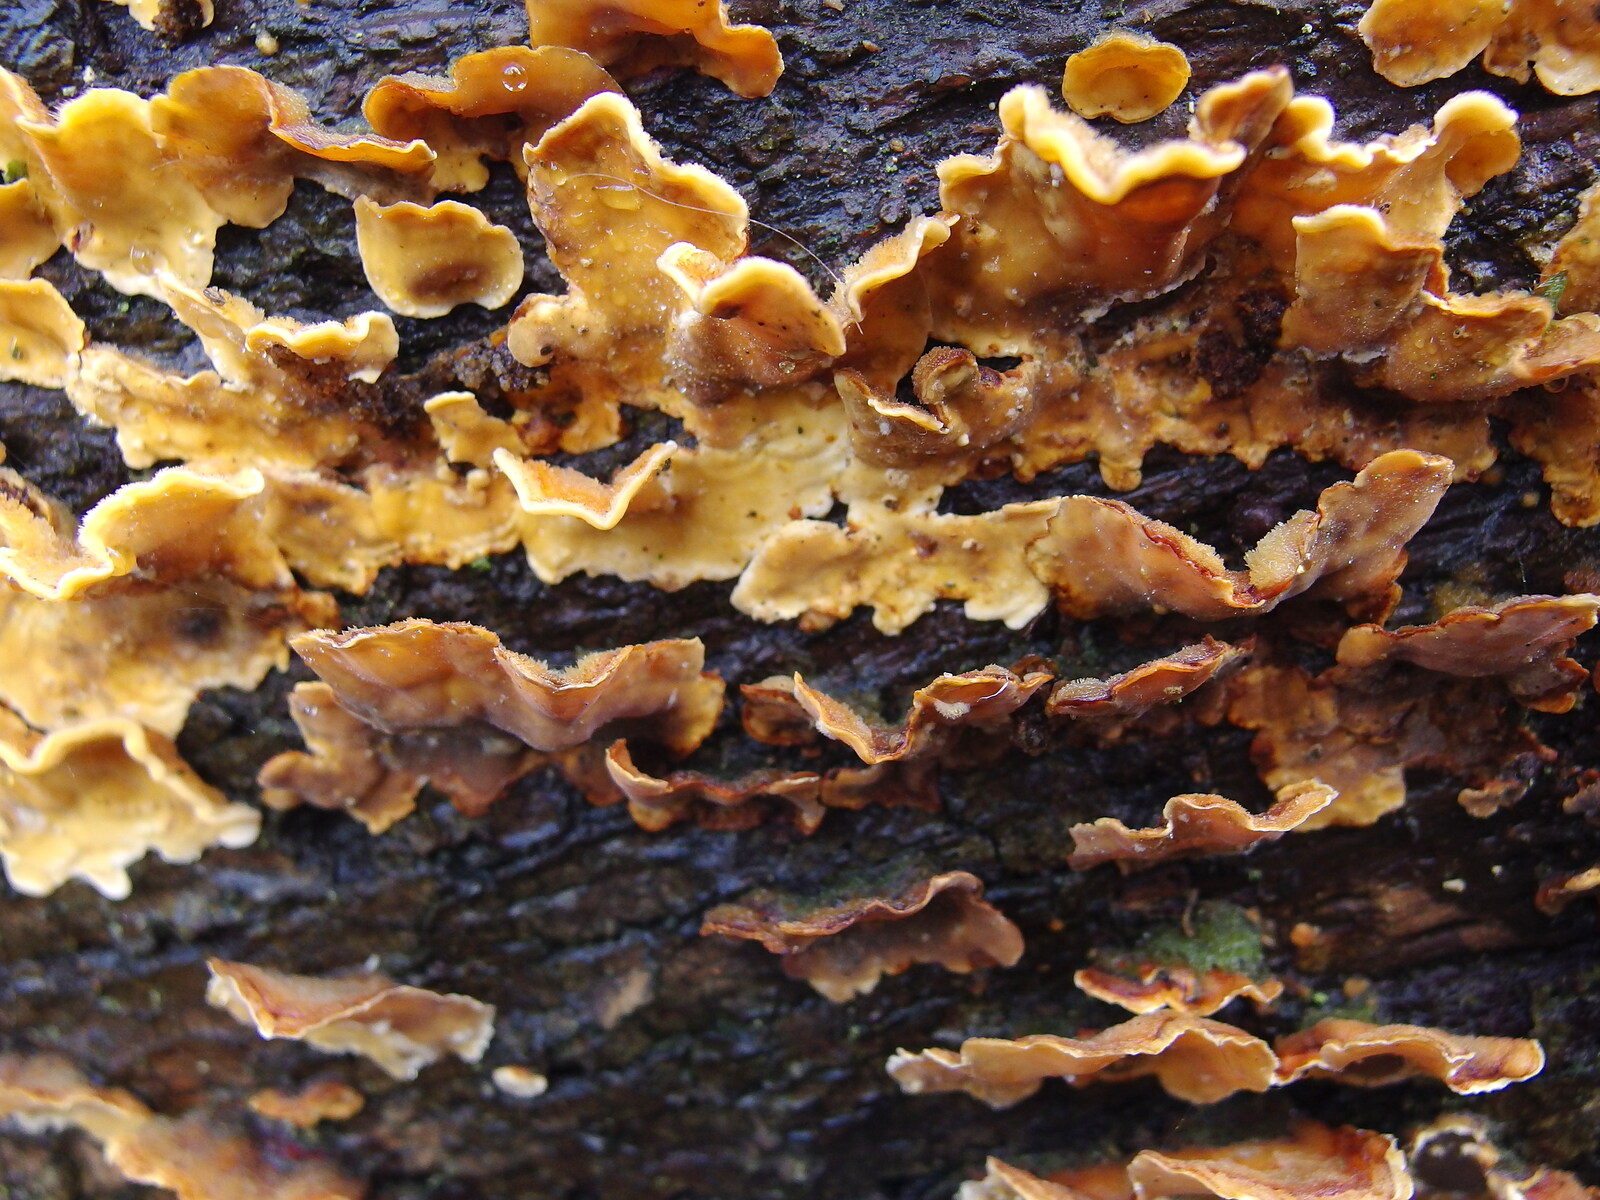 More funky fungus from A Boxing Day Walk, Thornham Estate, Suffolk - 26th December 2013